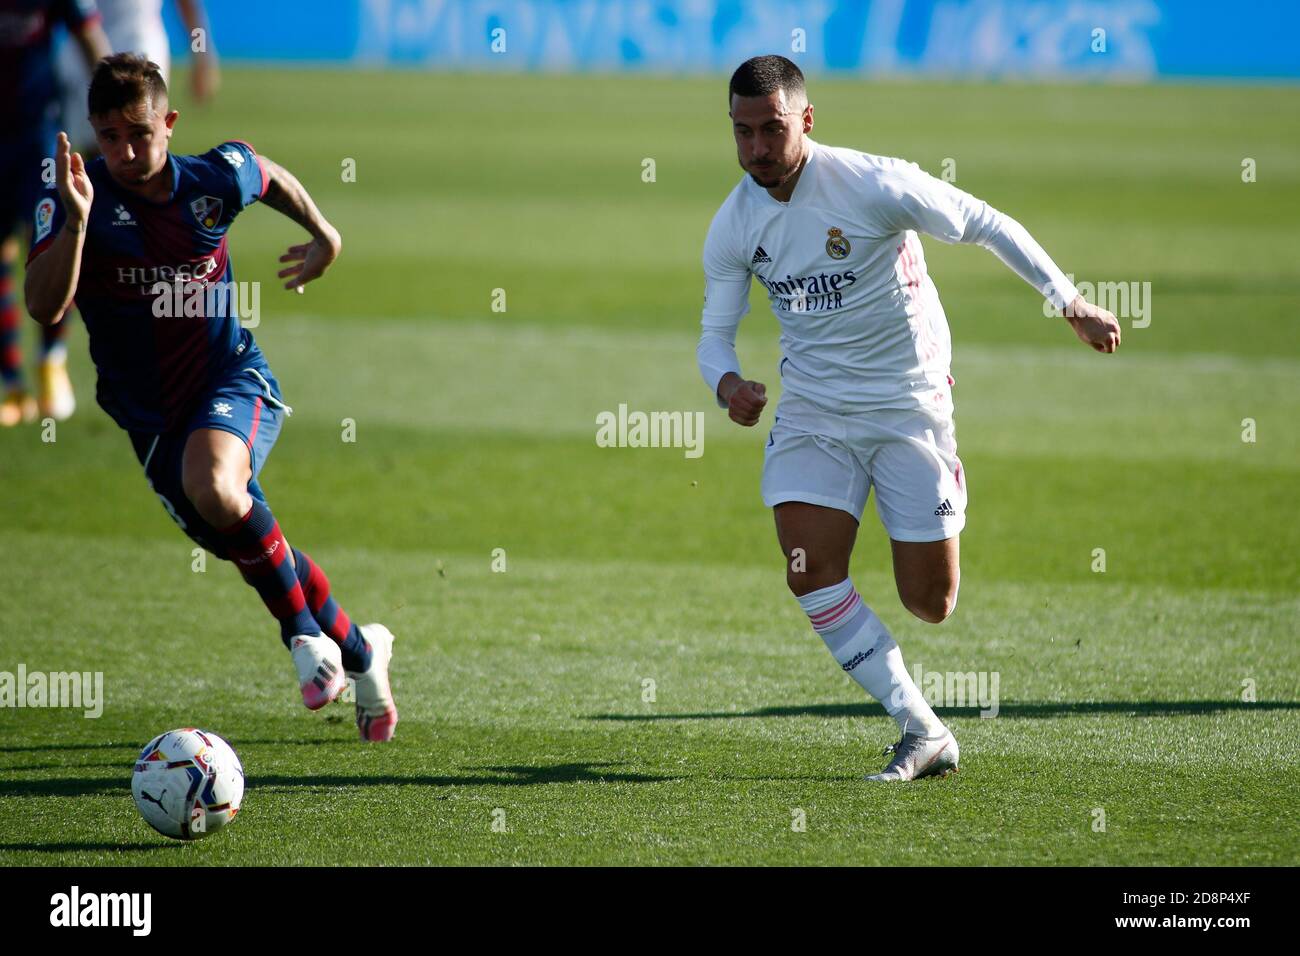 Madrid, Spain. 31st October, 2020. Eden Hazard of Real Madrid in action during the Spanish championship La Liga football match between Real Madrid and SD Huesca on October 31, 2020 at Alfredo Di Stefano stadium in Valdebebas, Madrid, Spain - Photo Oscar J Barroso / Spain DPPI / DPPI Credit: LM/DPPI/Oscar Barroso/Alamy Live News Stock Photo